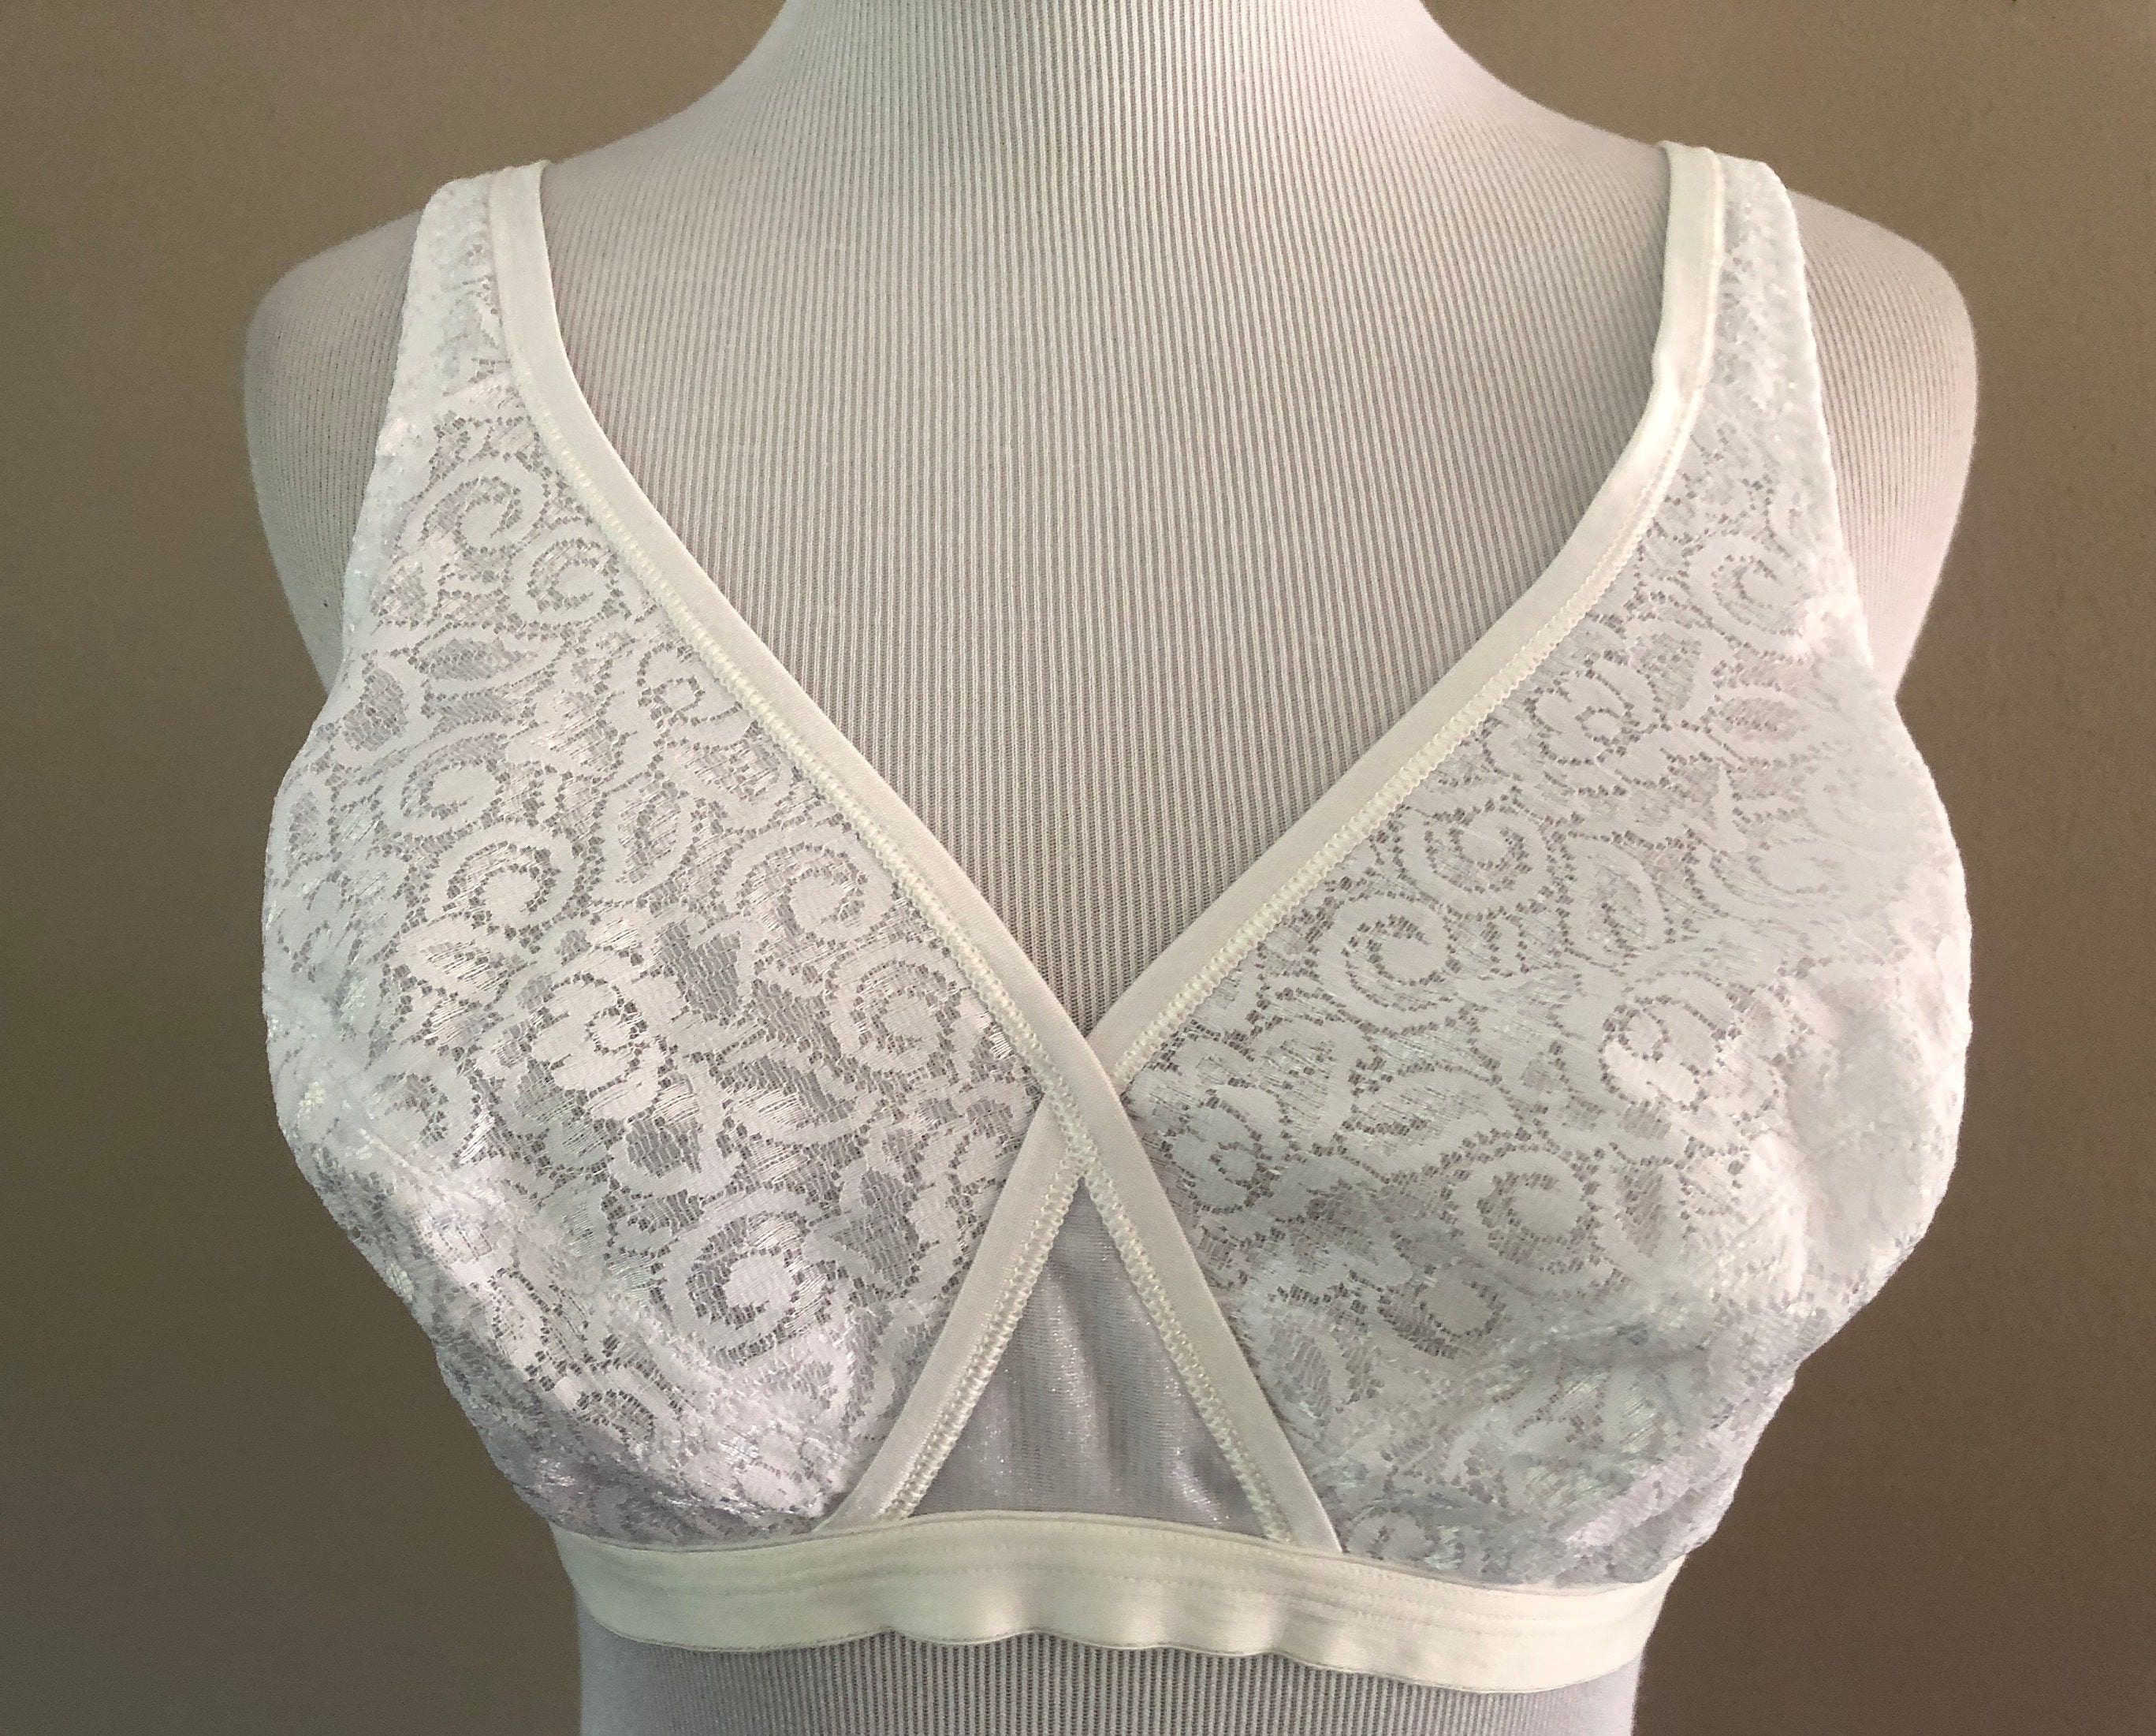 Vintage 1960s White Lace 2 Part Cup Bra Size 38C by Playtex, Style 0120 -   New Zealand